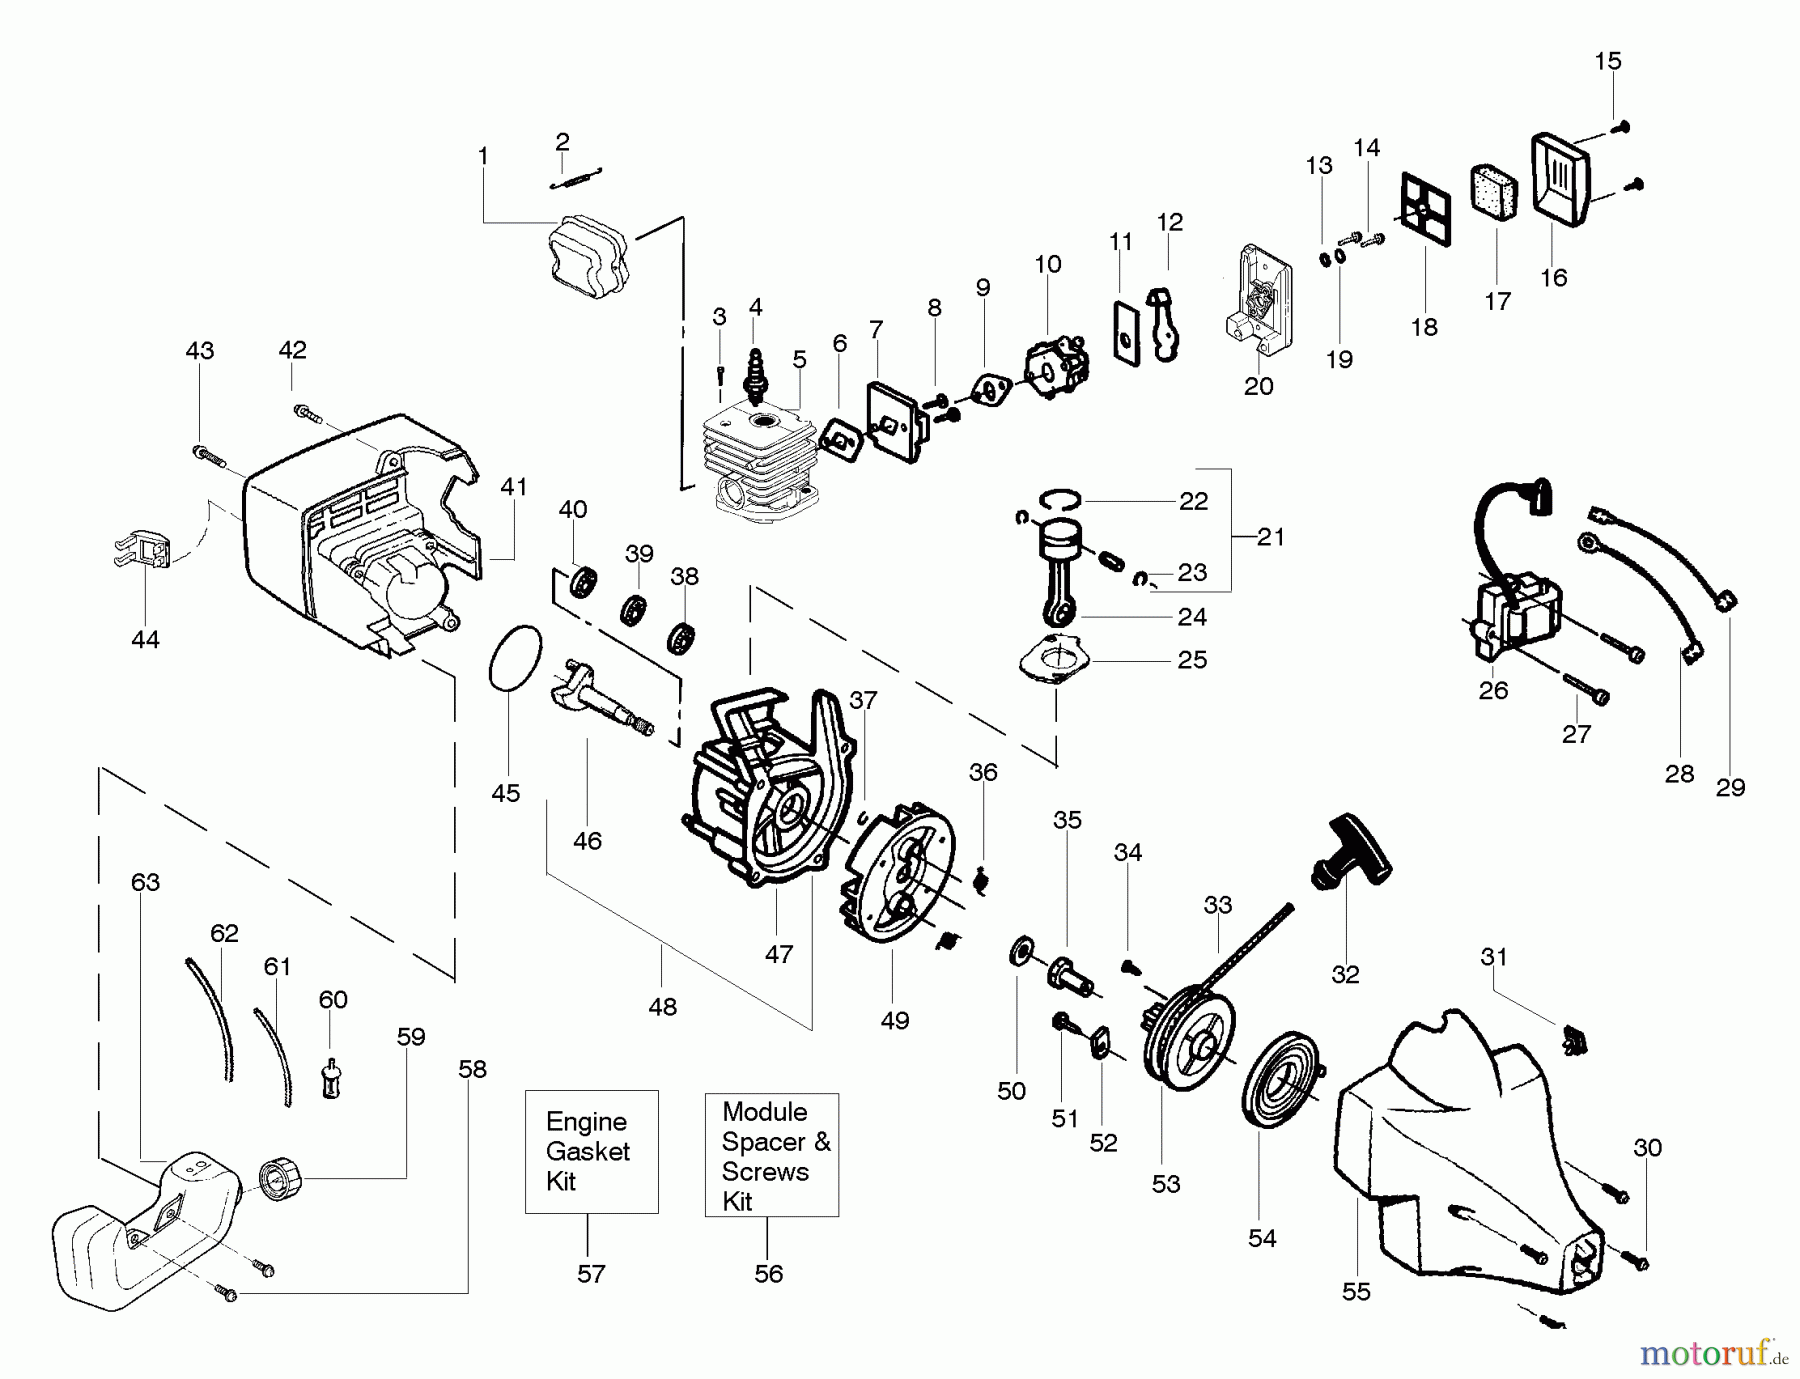  Poulan / Weed Eater Motorsensen, Trimmer XT600 (Type 6) - Weed Eater String Trimmer Engine Assembly Type 6